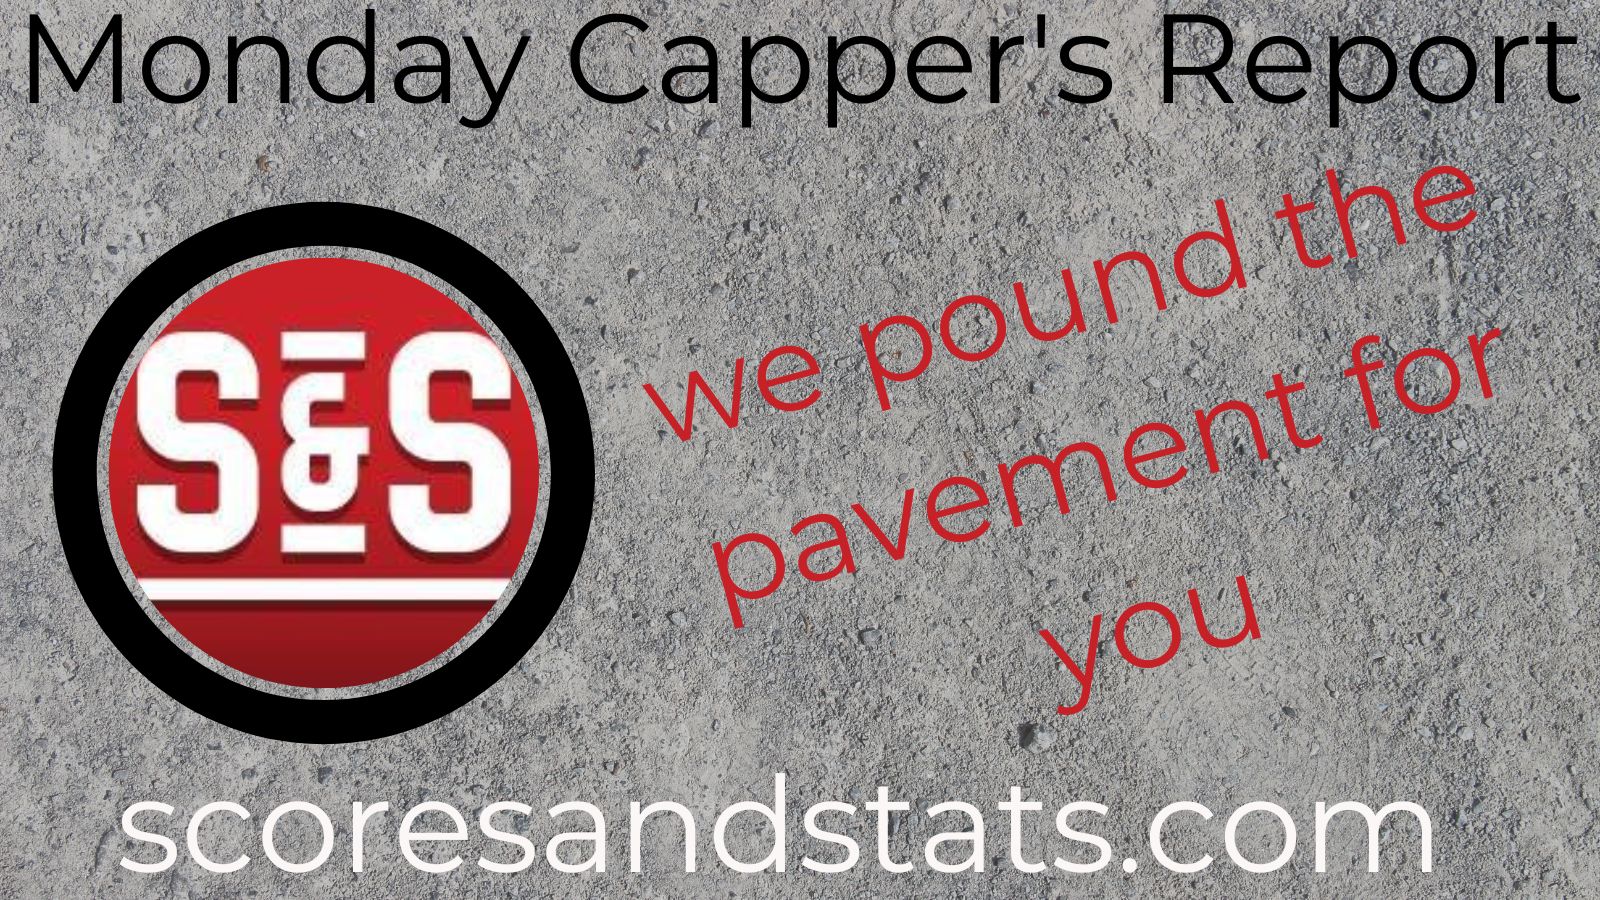 Scores And Stats على تويتر Sands Monday Cappers Report Who Is On Fire